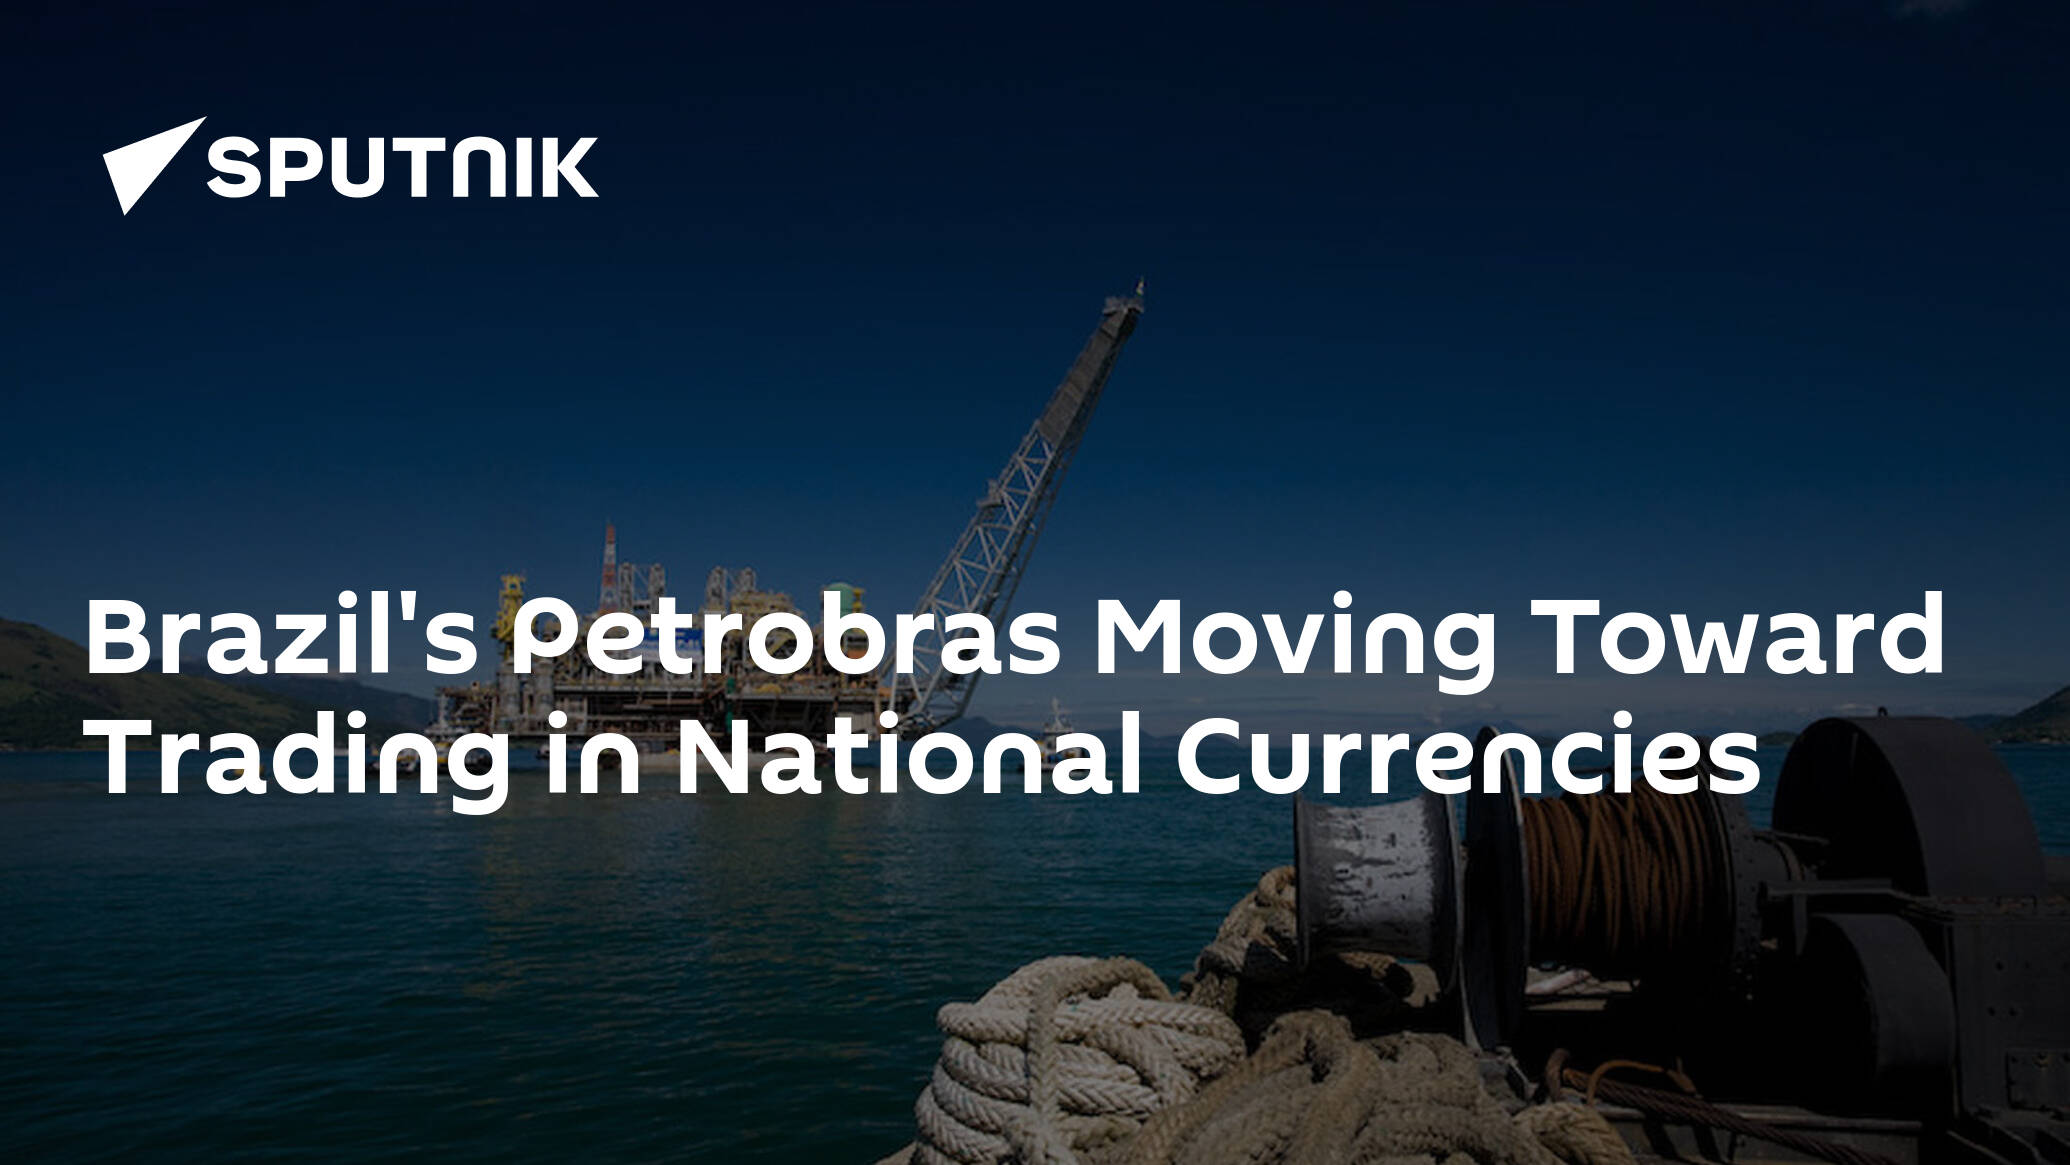 Brazil's Petrobras Moving Toward Trading in National Currencies